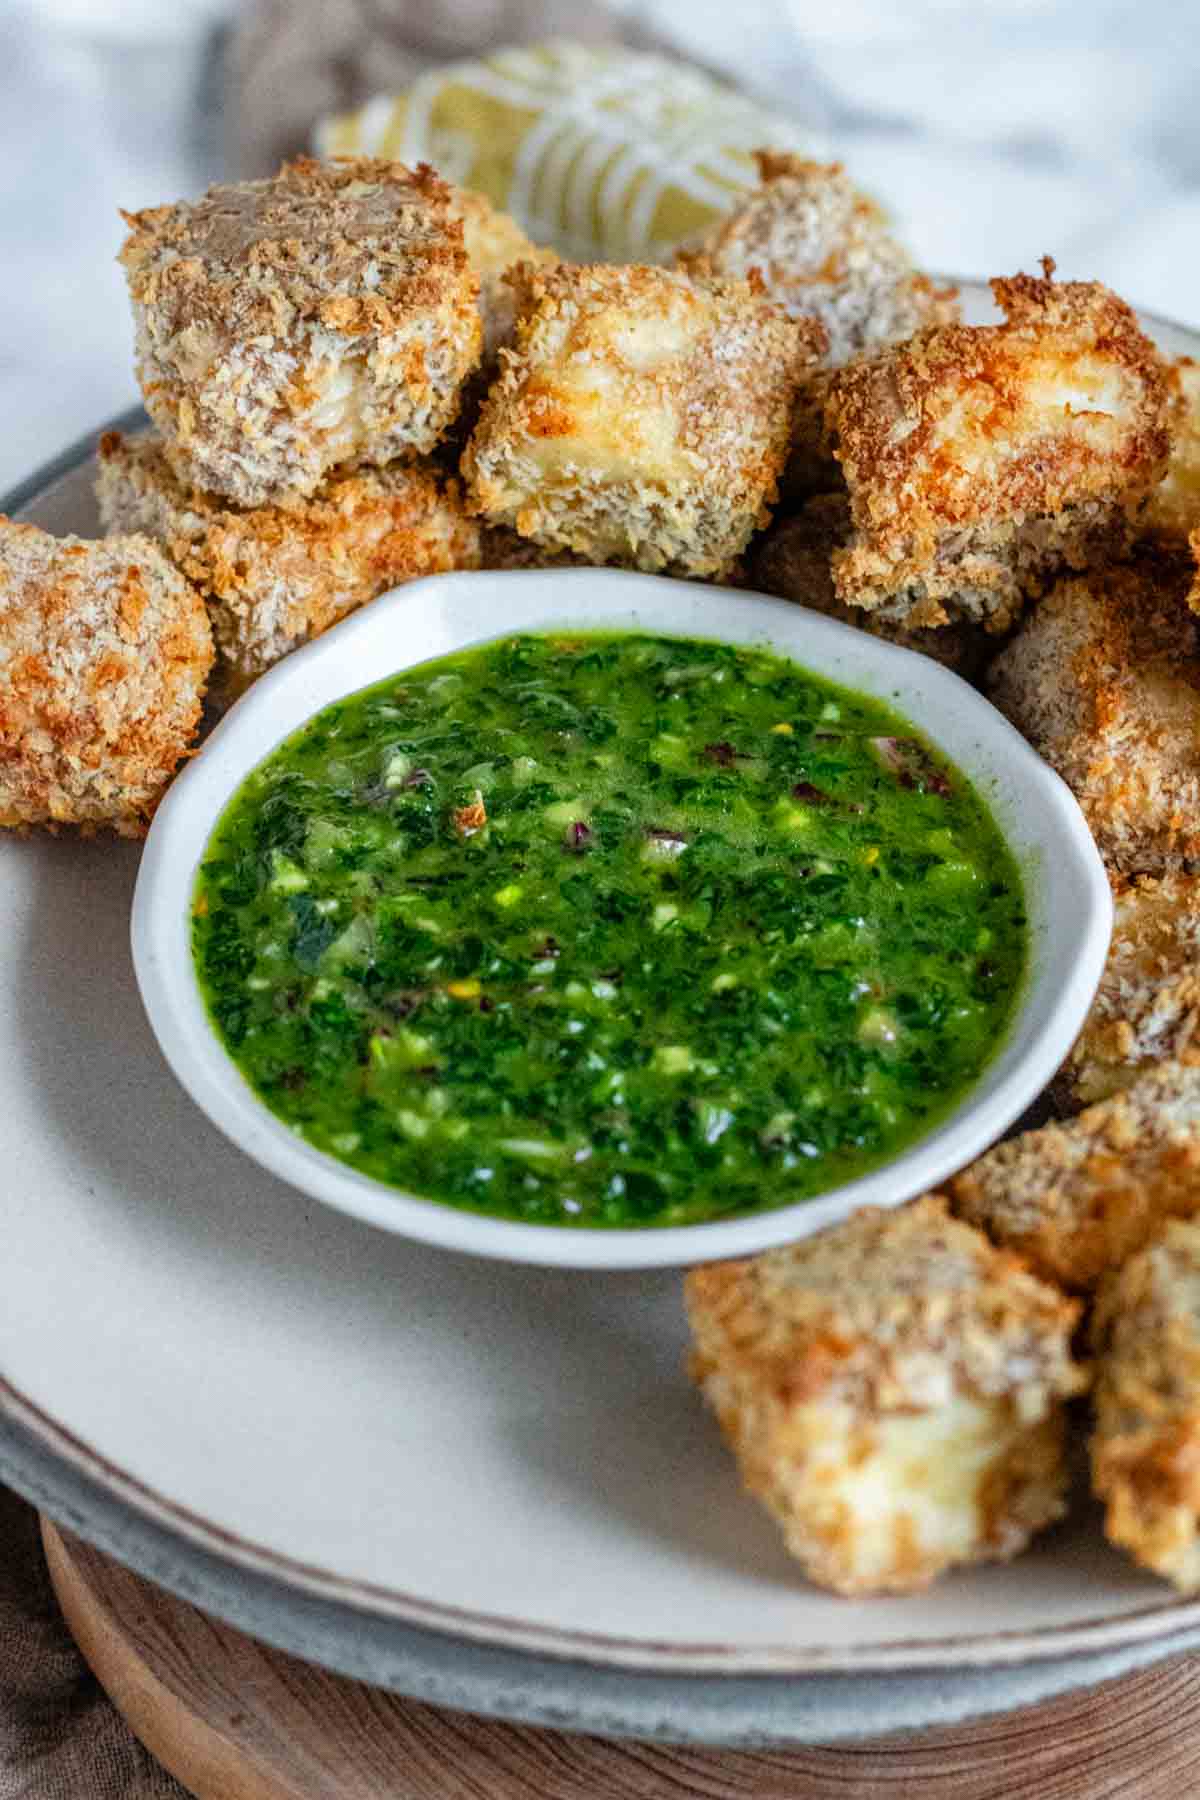 Bright green chimichurri sauce in a bowl surrounded by air-fried breaded paneer.